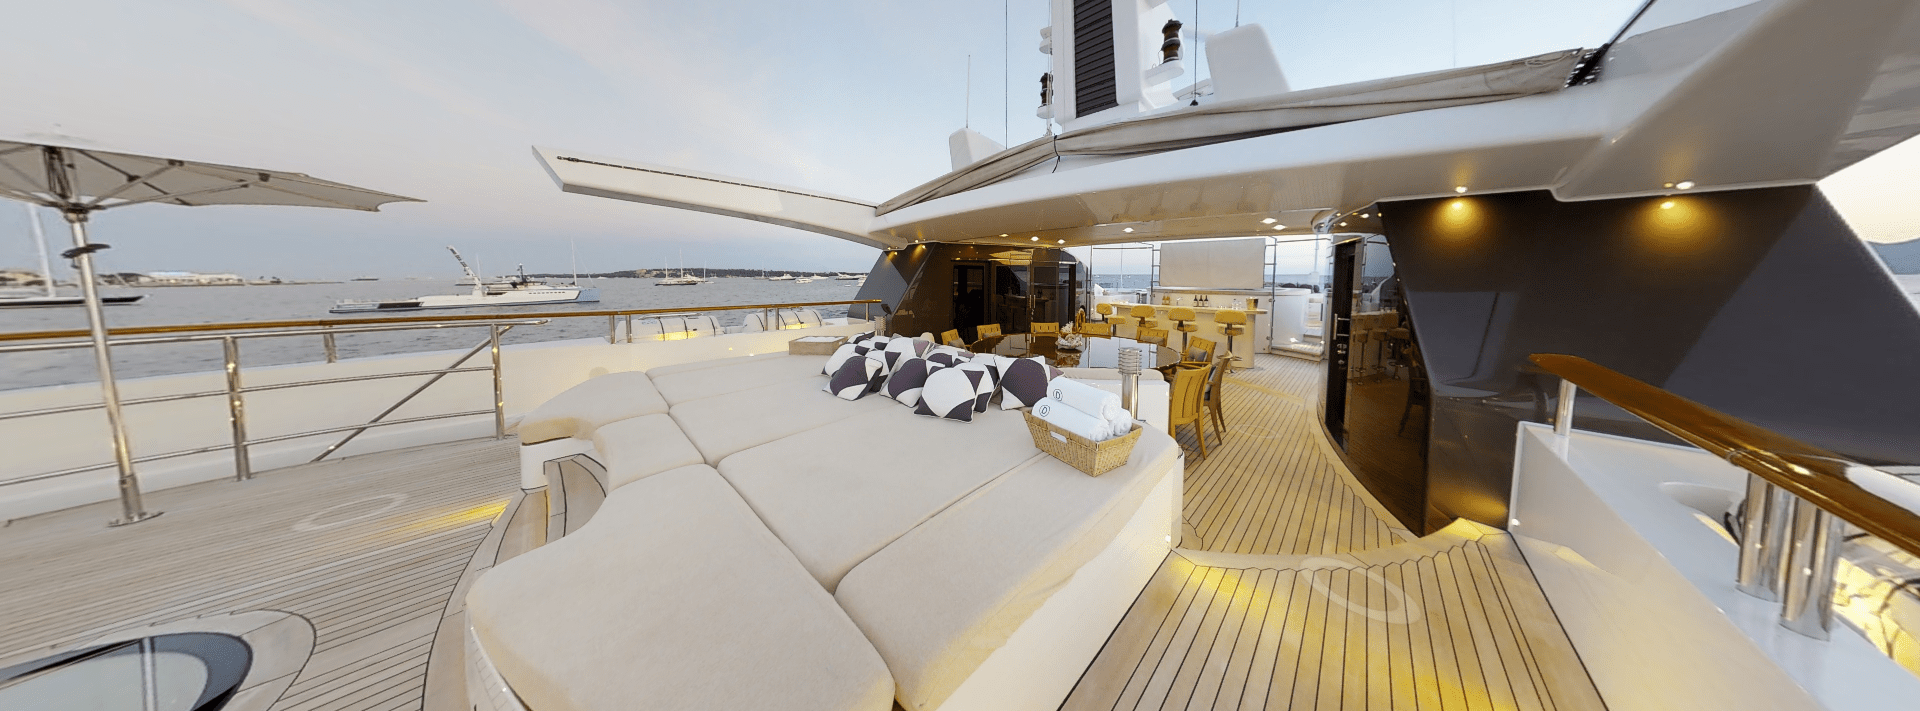 3D Virtual Tours - Yachts and more